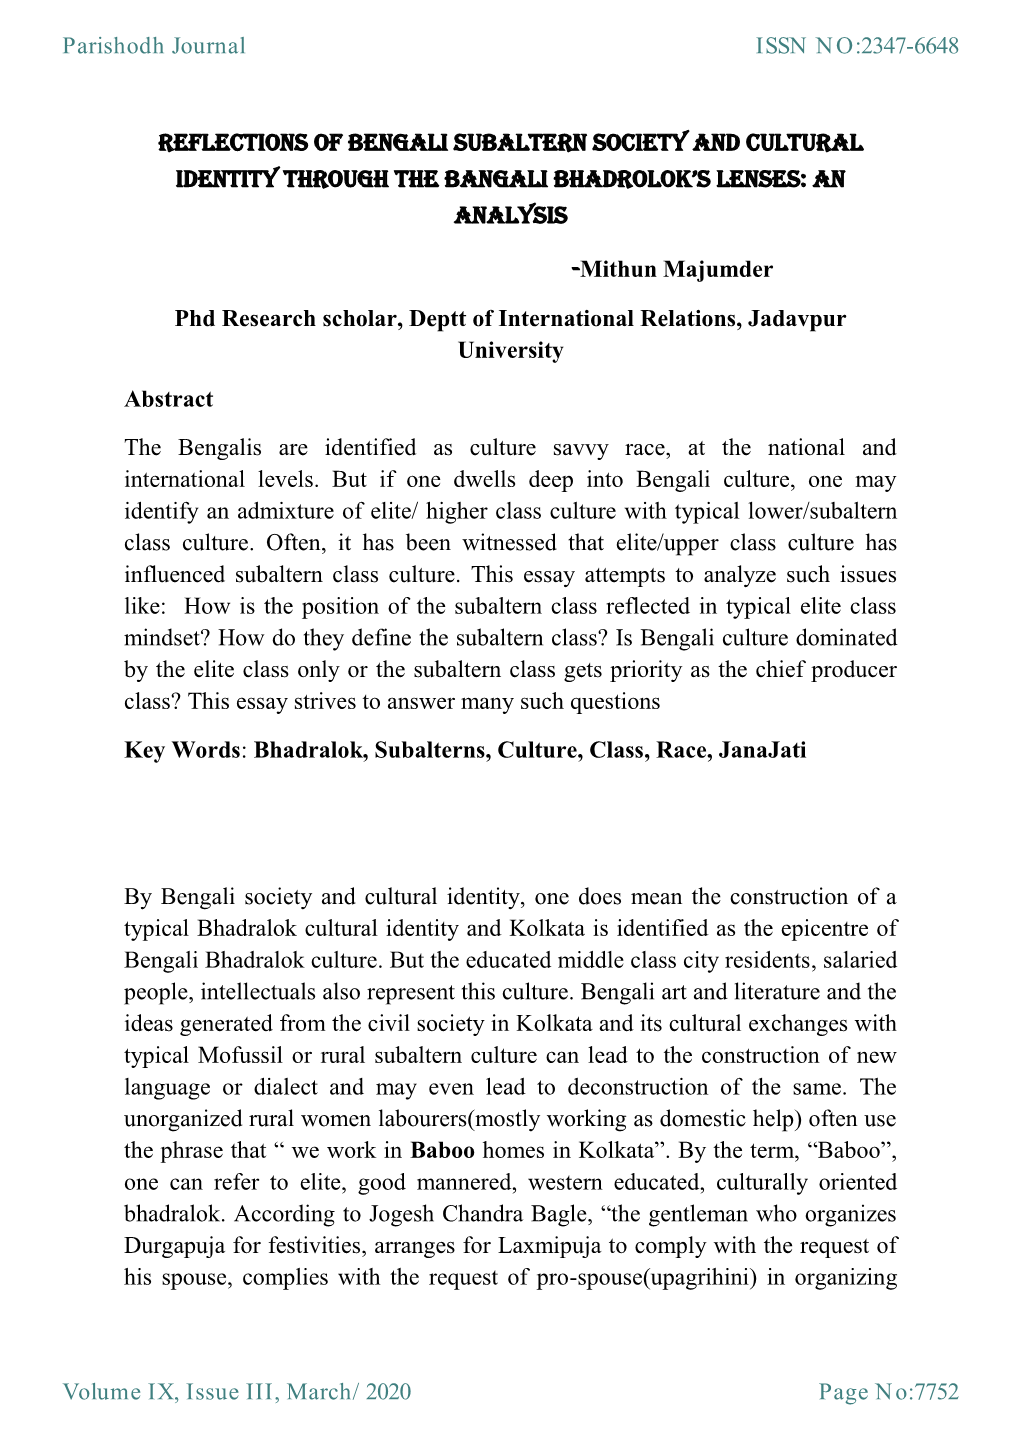 Reflections of Bengali Subaltern Society and Cultural Identity Through the Bangali Bhadrolok’S Lenses: an Analysis